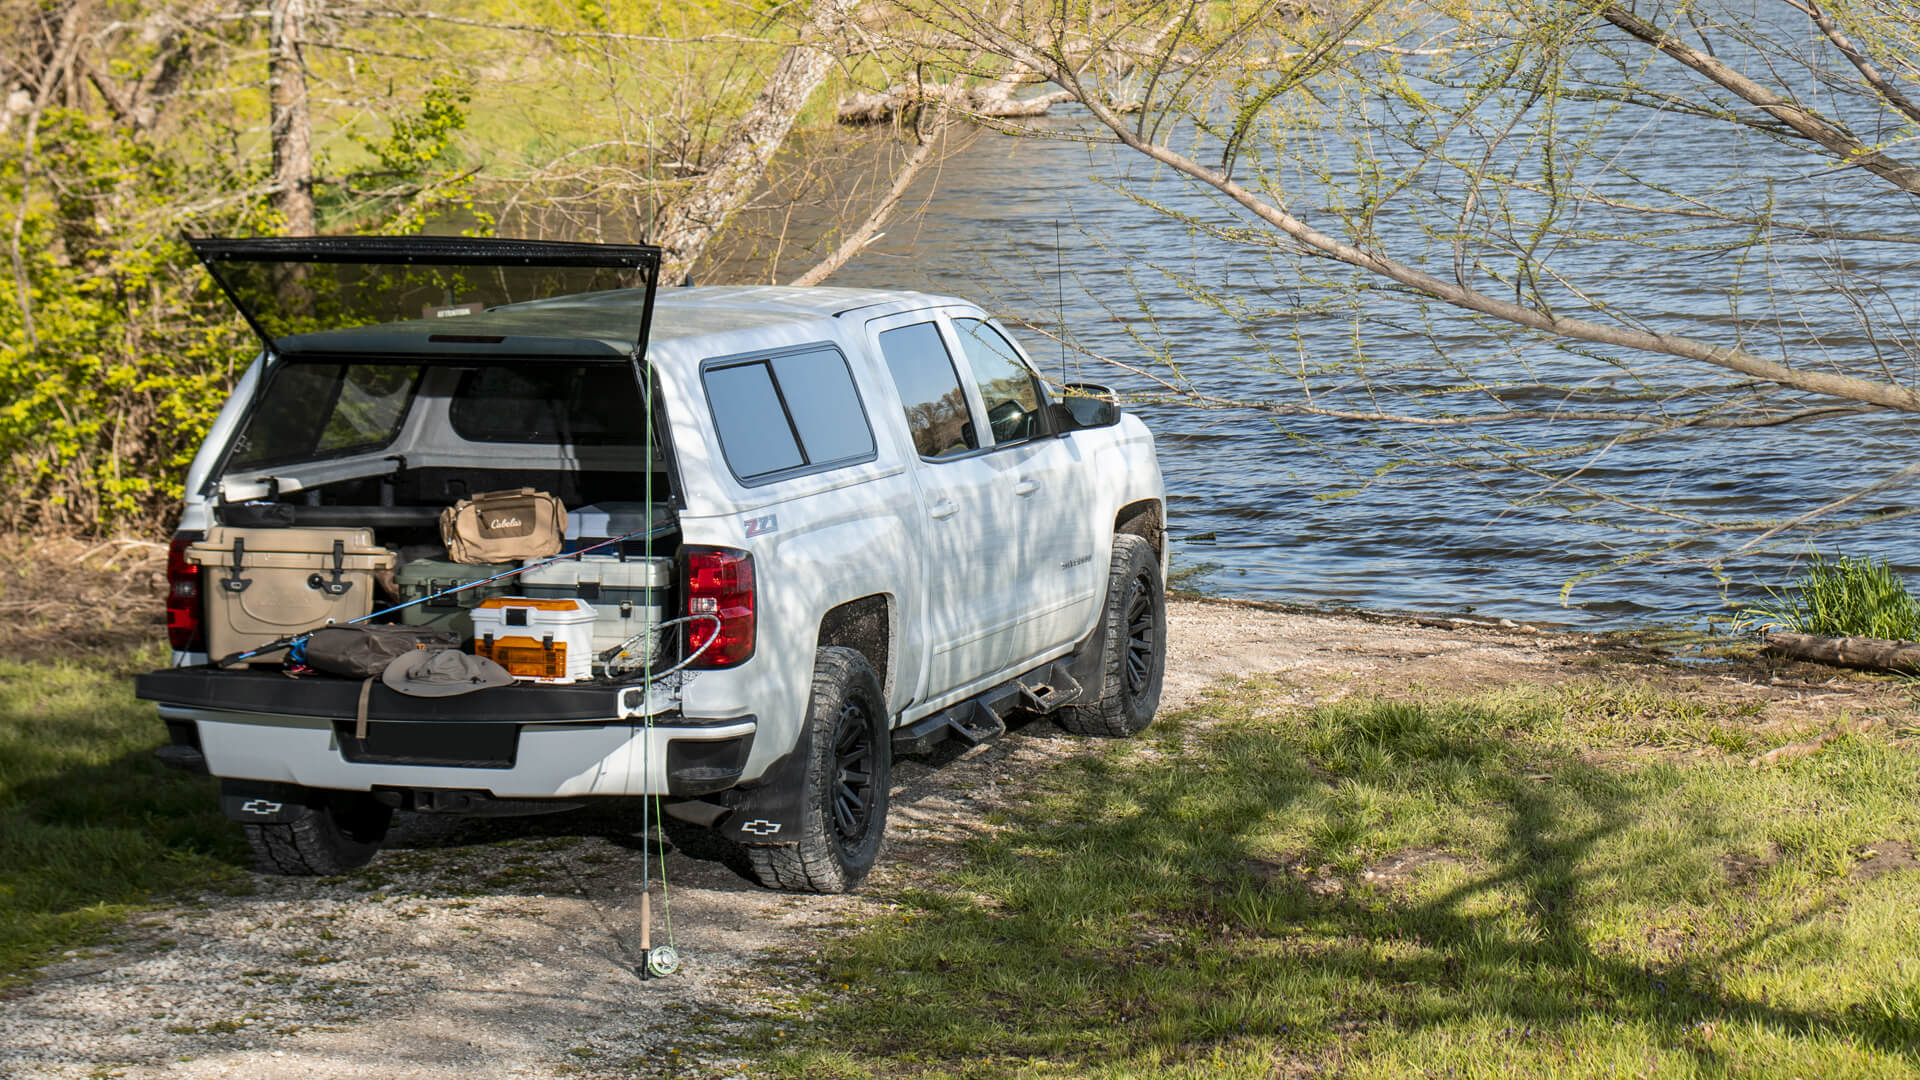 White Chevy Silverado with a Jason truck cap and fishing gear loaded in front of a lake